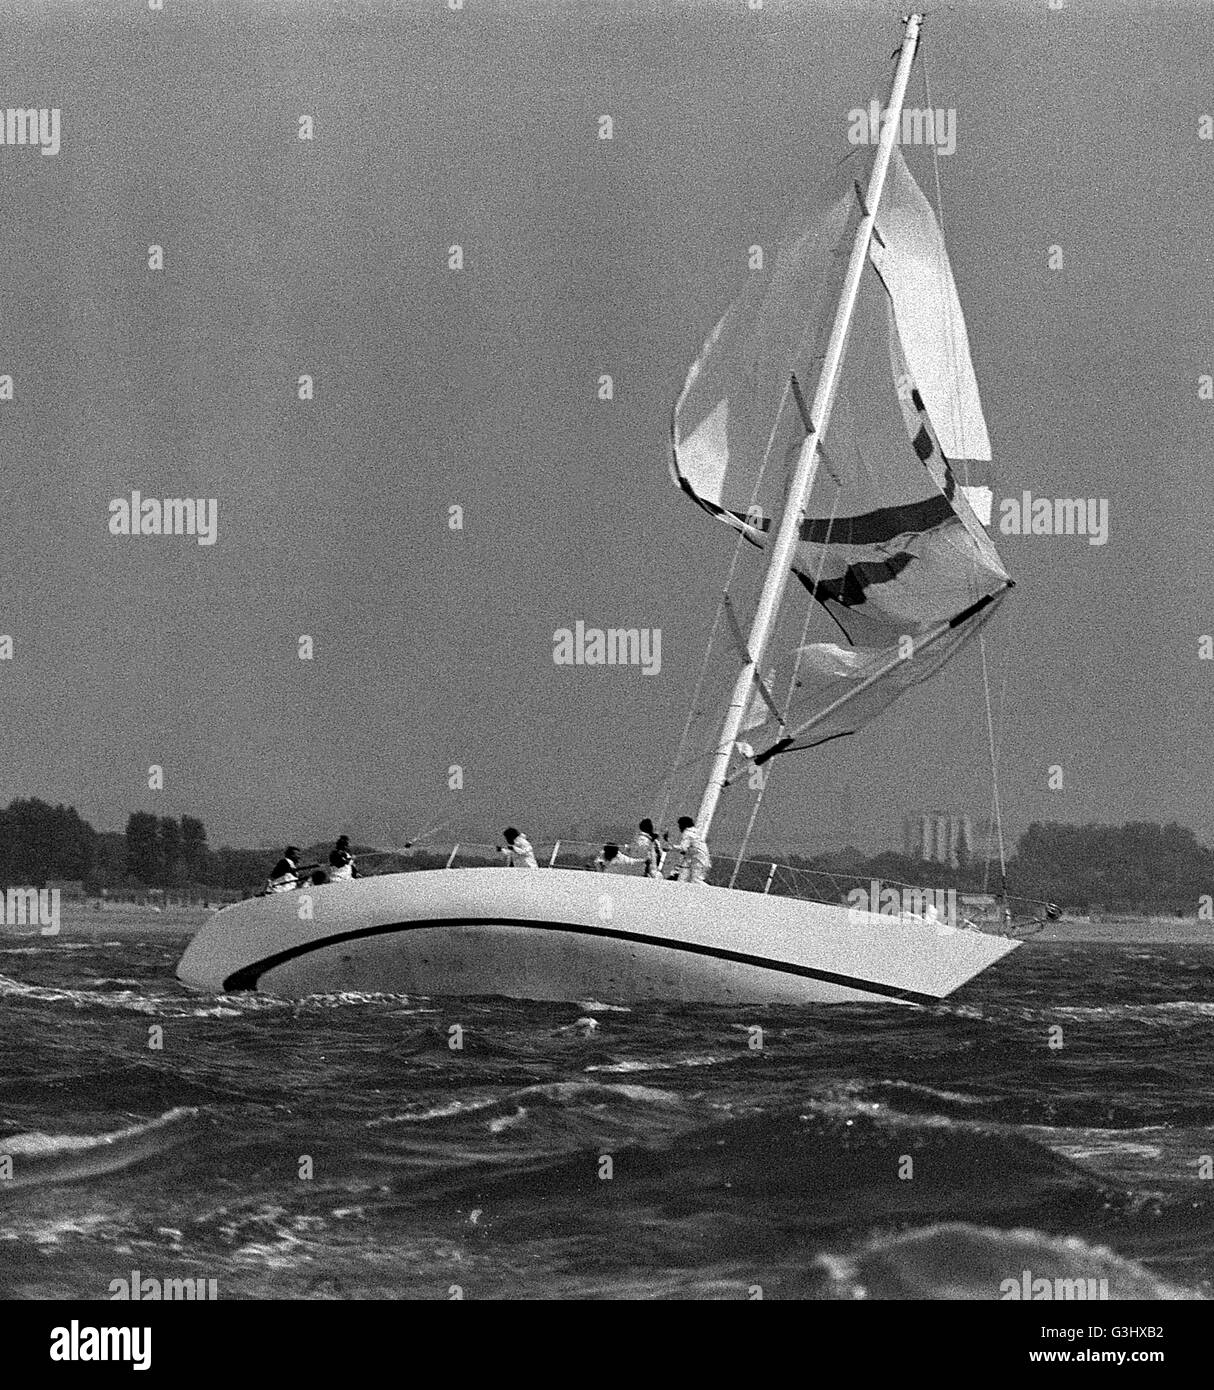 AJAXNETPHOTO. 1979. SOLENT, ENGLAND. - ADMIRAL'S CUP - SOLENT INSHORE RACE. BLIZZARD (GBR) IN TROUBLE IN GUSTY CONDITIONS. PHOTO:JONATHAN EASTLAND/AJAX REF:79 2016 Stock Photo